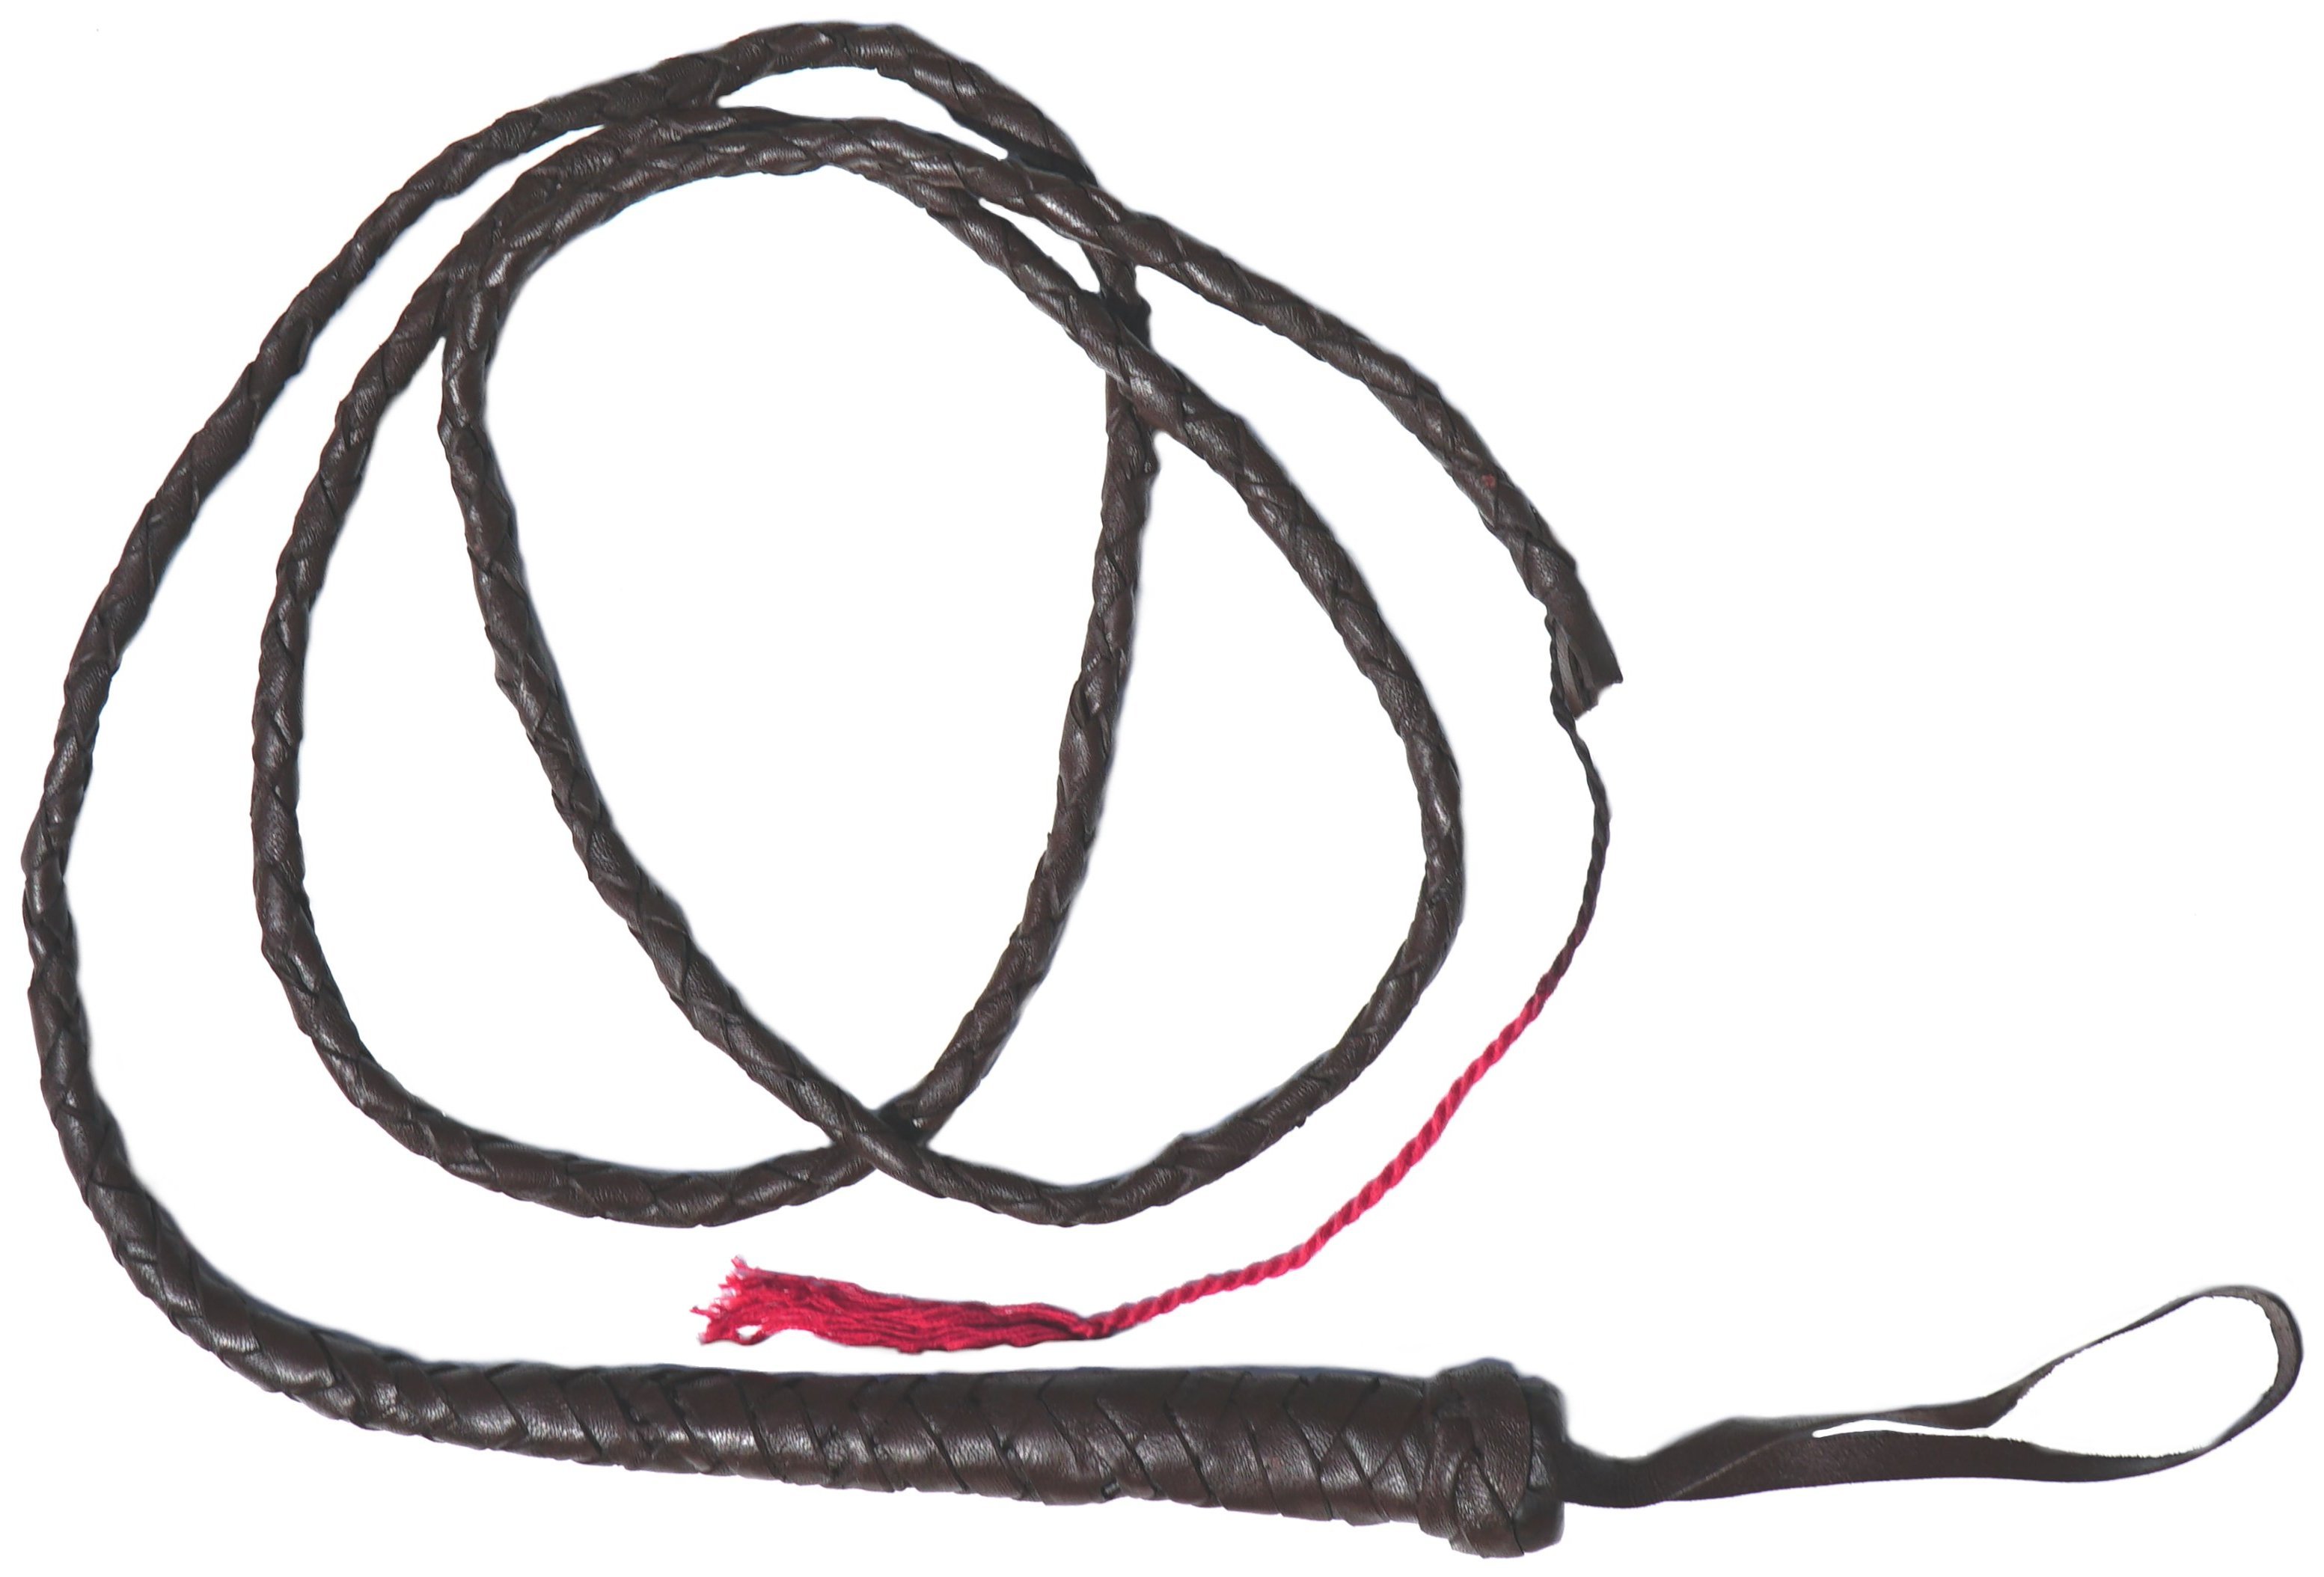 Indiana Jones Leather Whip Adult Halloween Accessory - image 2 of 2